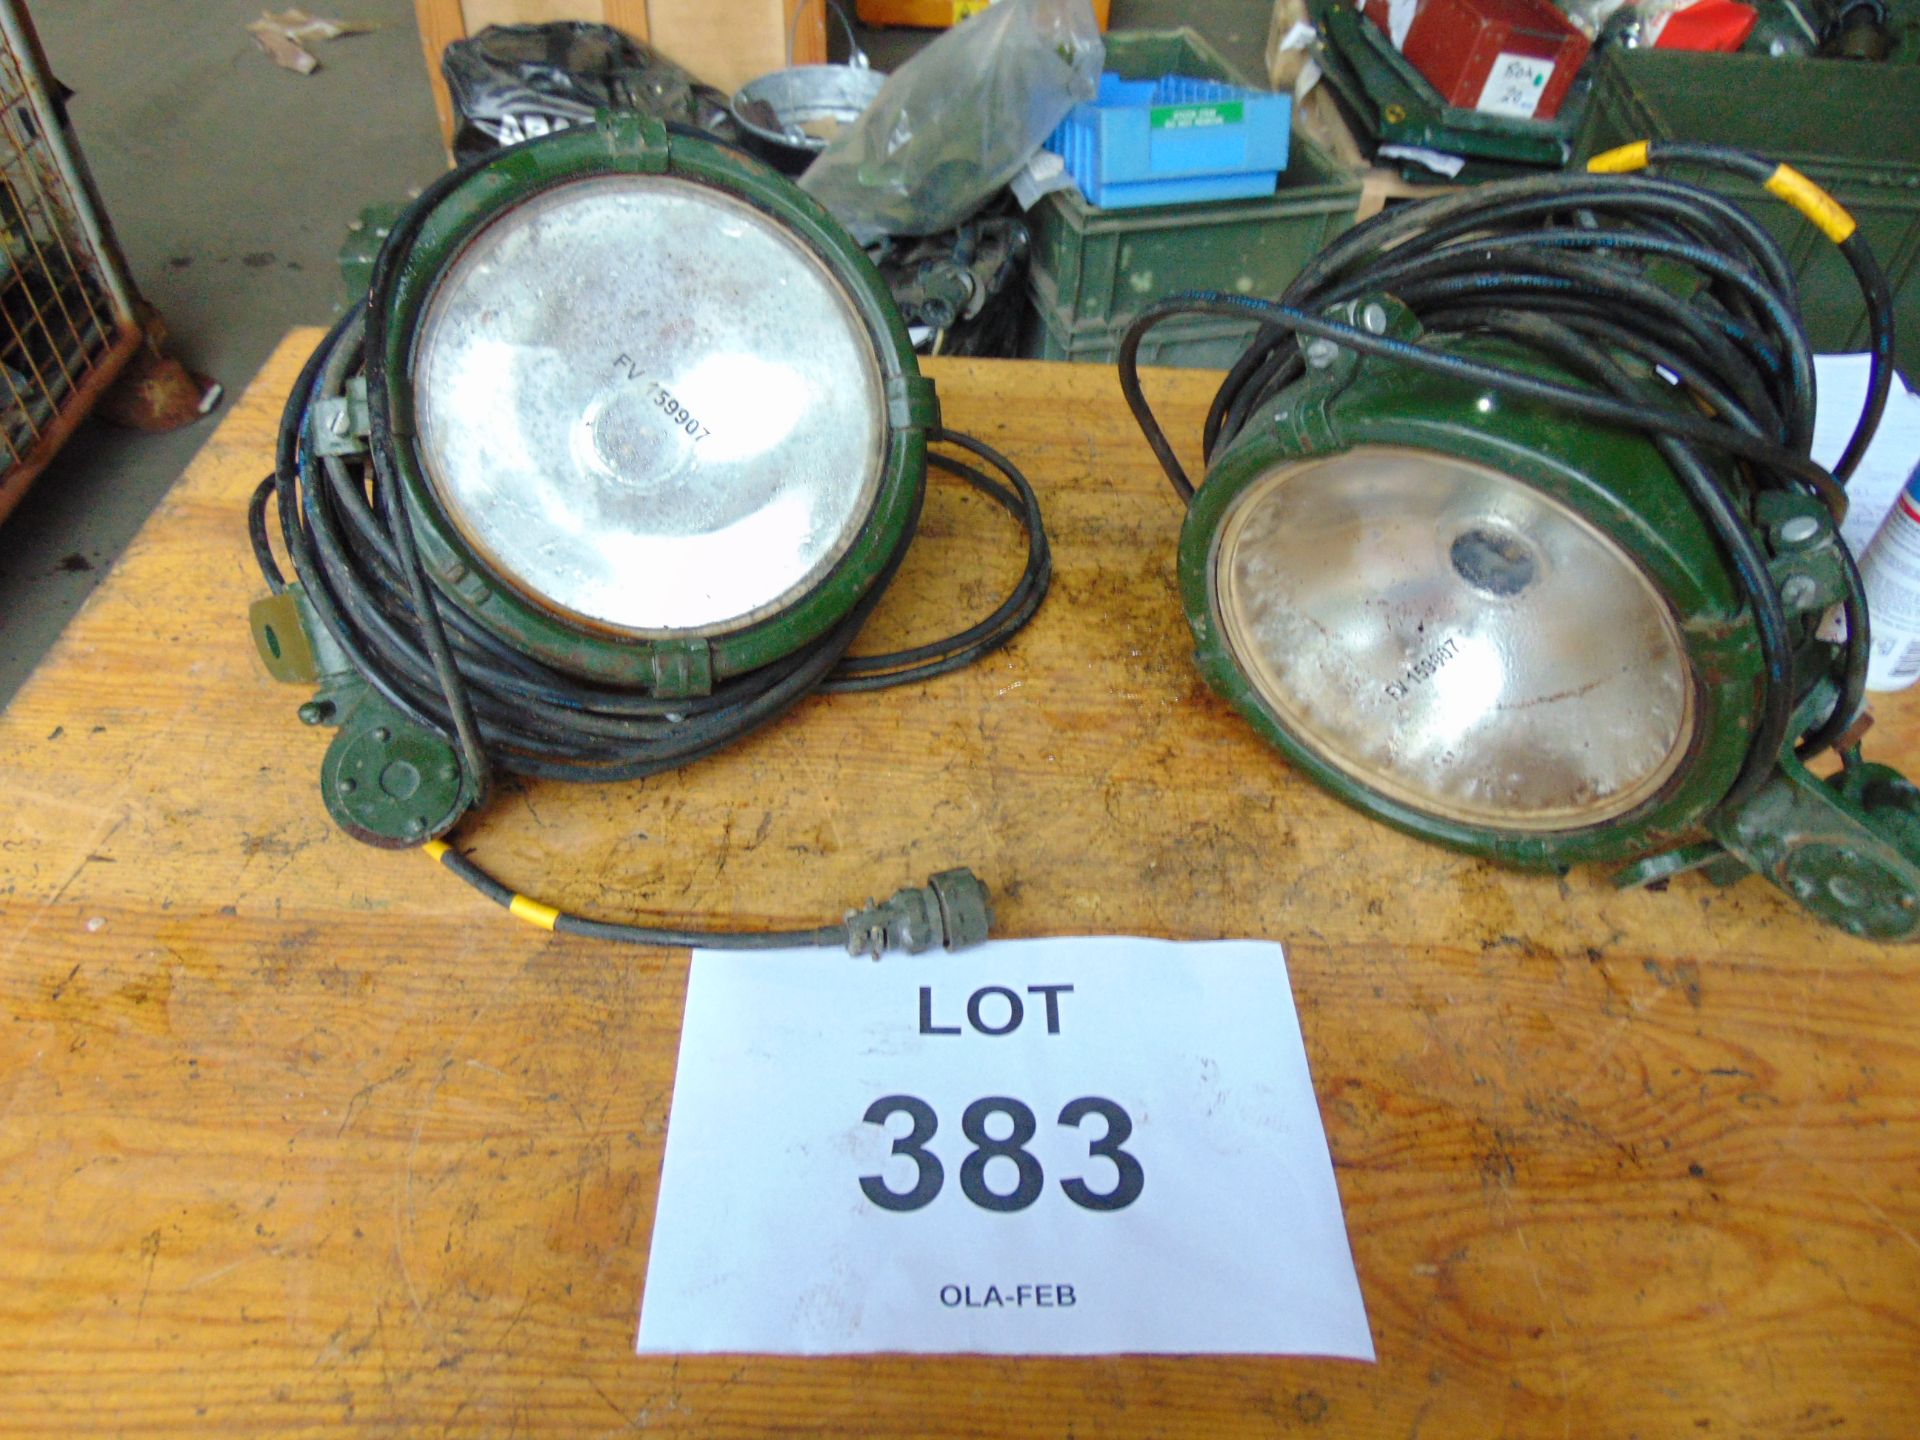 2 x FV159907 Vehicle Spot Lamp c/w Bracket and Leads - Image 7 of 7